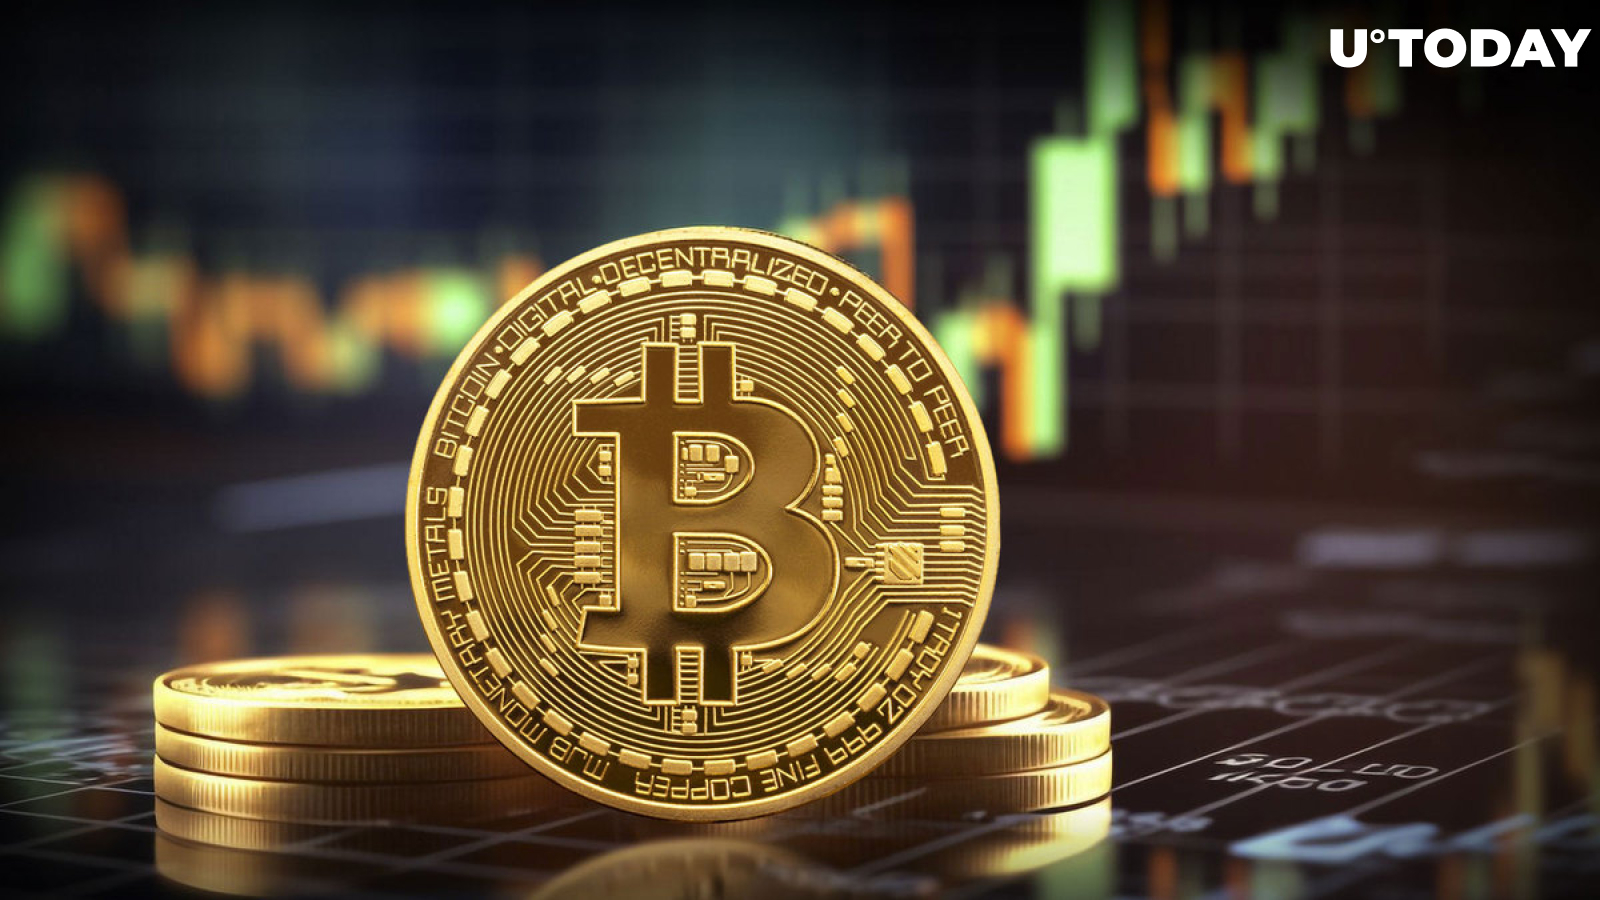 5 Key Reasons Why Bitcoin (BTC) May Hit All-Time High Soon